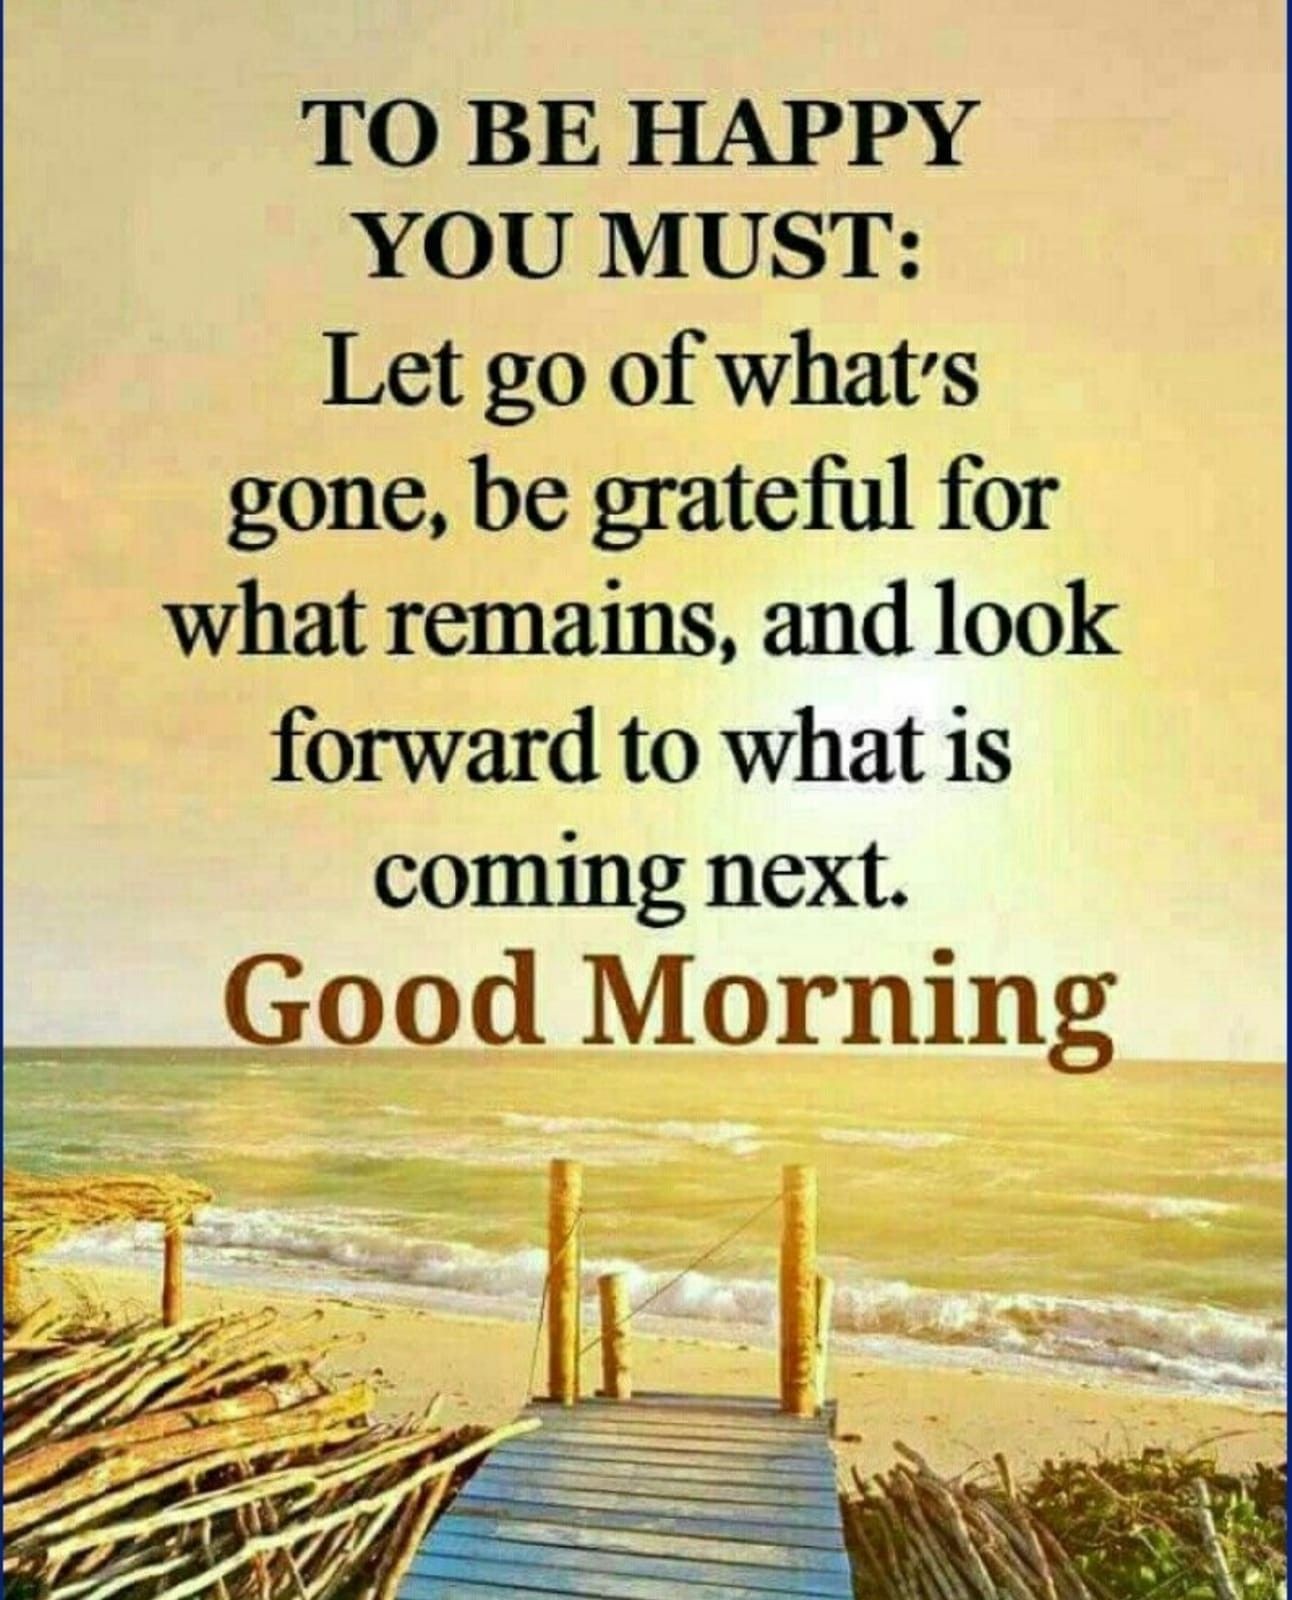 Good Morning Motivation quotes and wishes in English the greatest